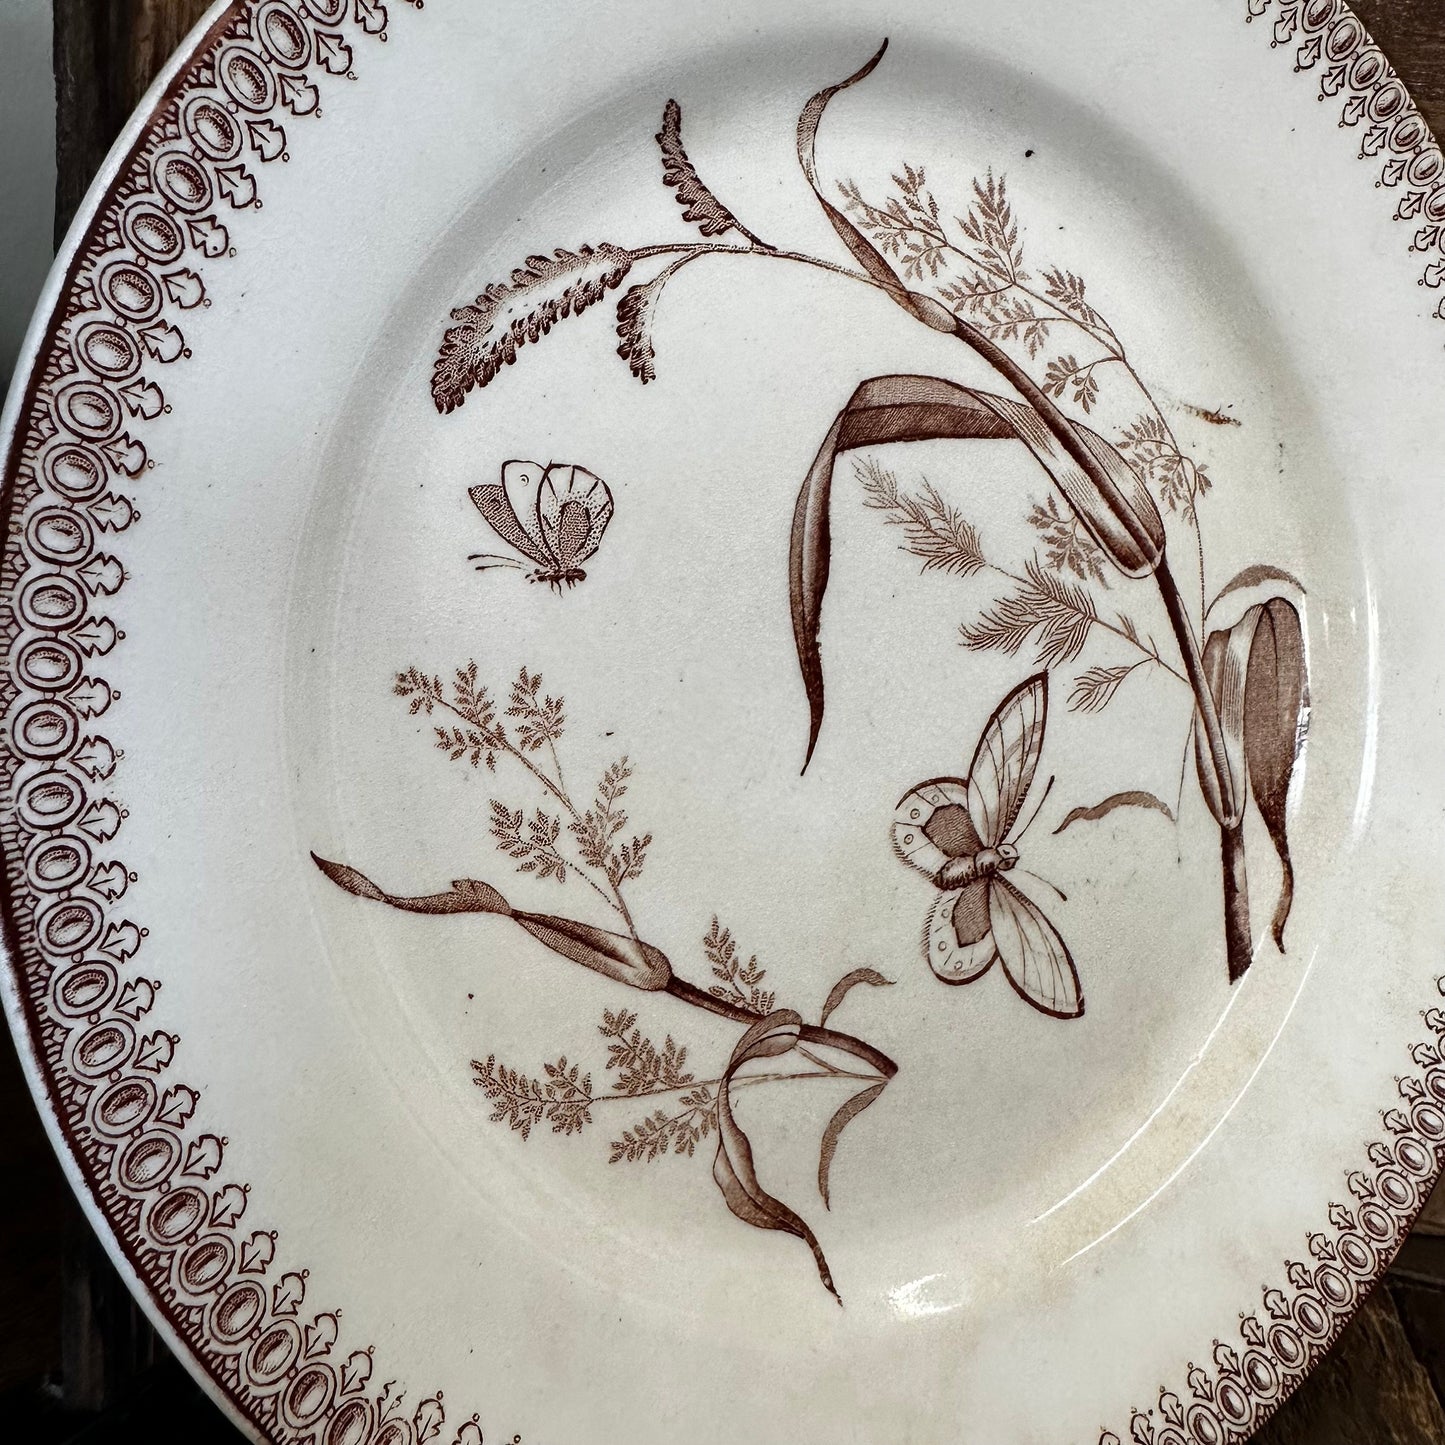 T&R Boote Summer Time Pattern Brown Transferware 8.75" Plate Dishes Floral Aesthetic Movement